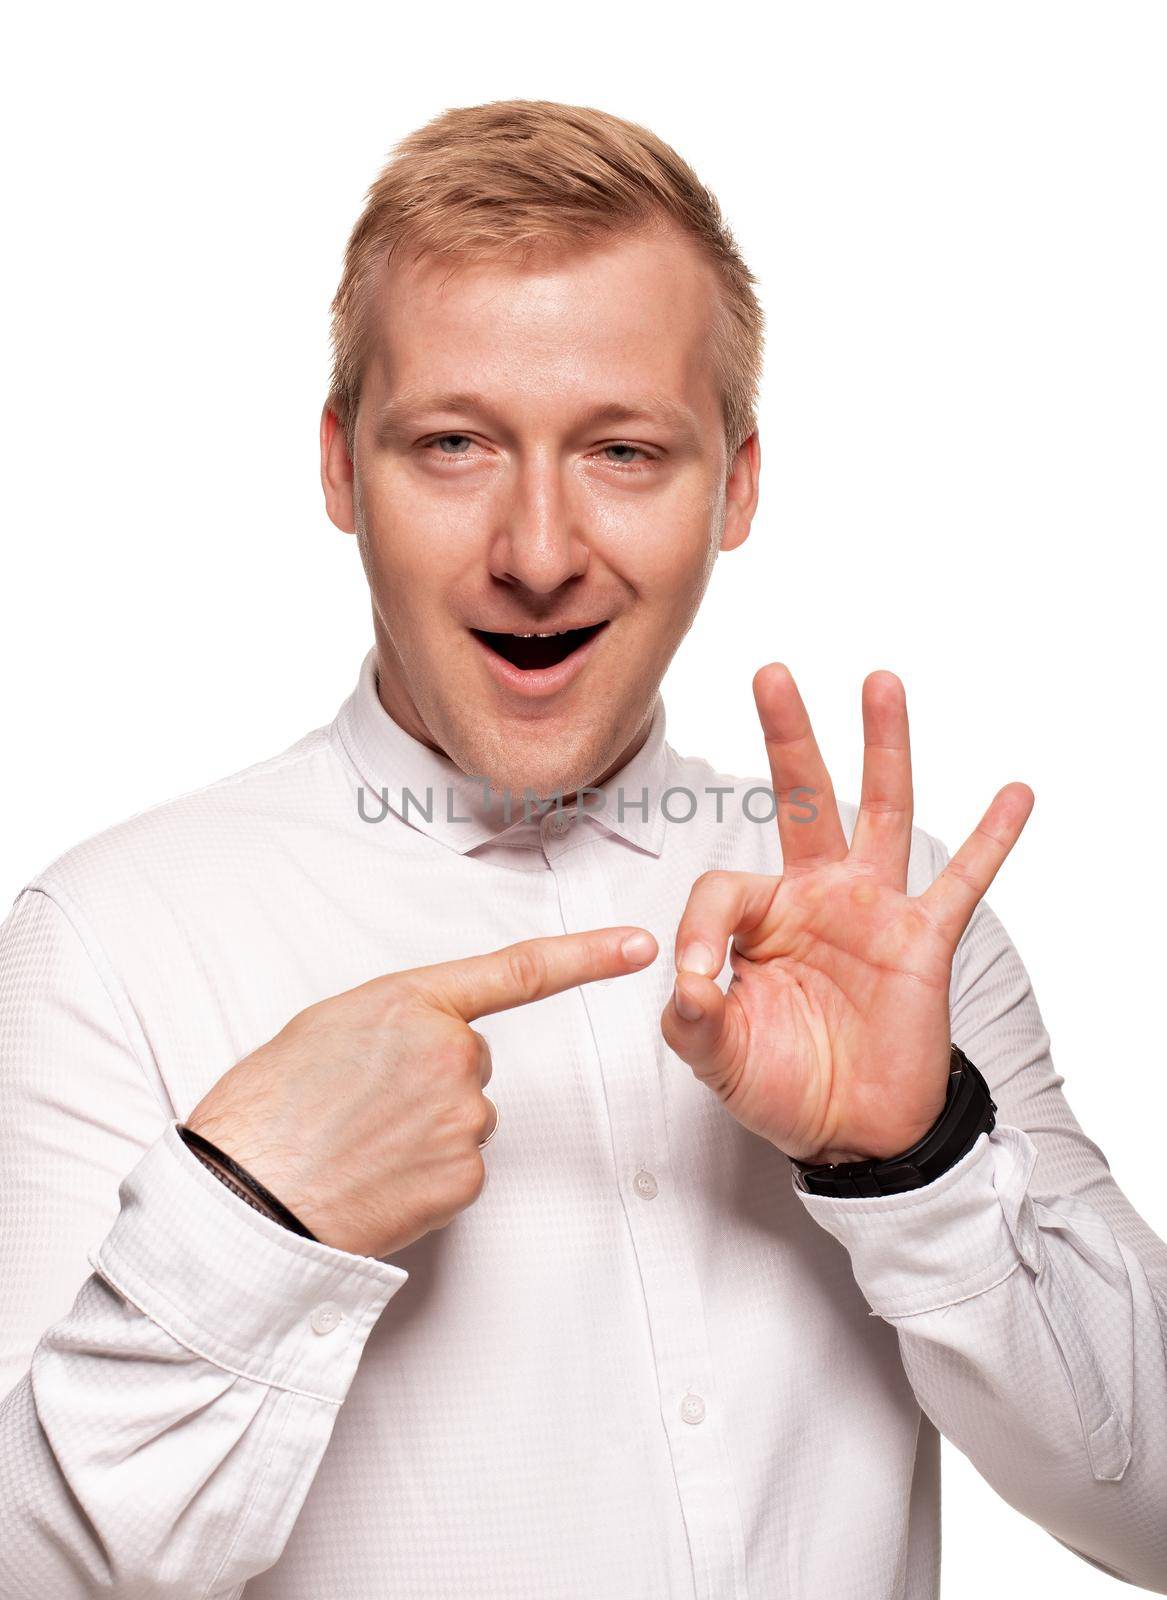 Imposing, young, blond man in a white shirt, with black watches is gesticulating and smiling, while standing isolated on a white background